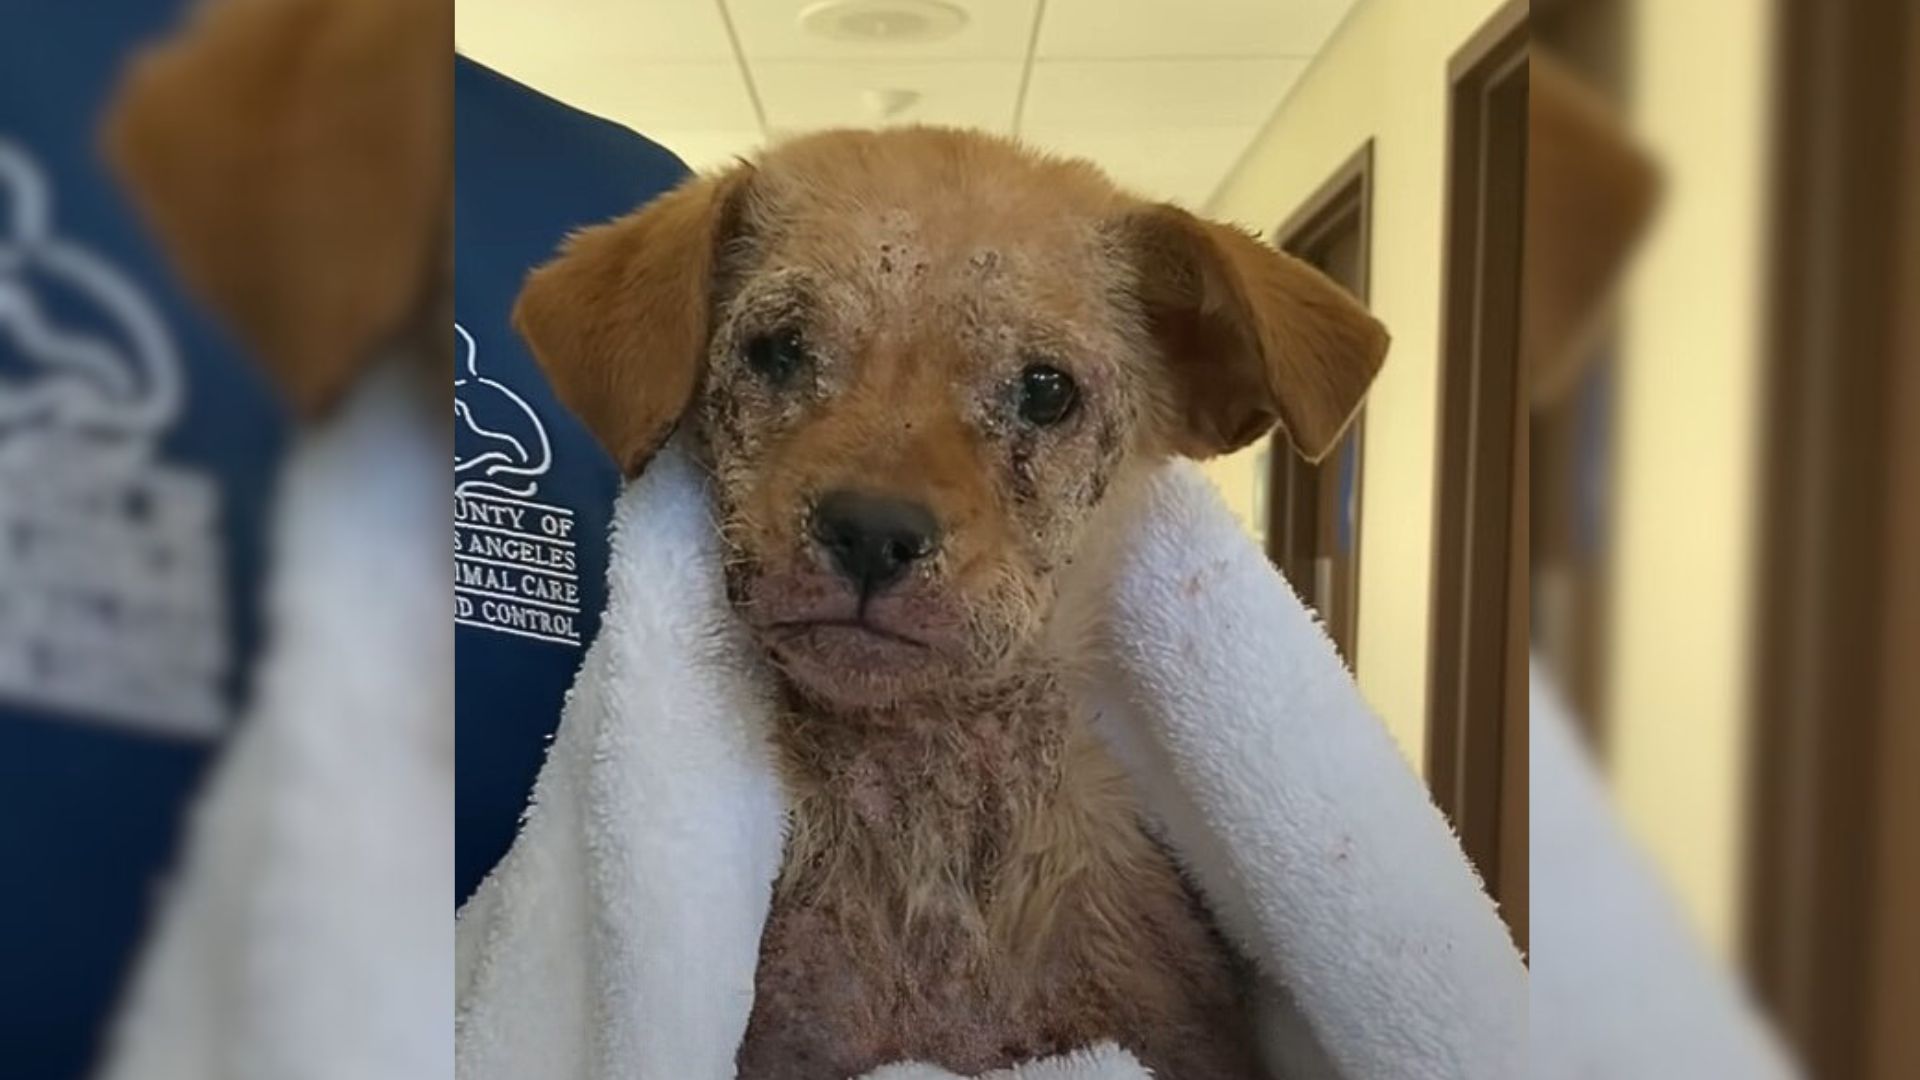 A Sad Little Puppy Who Was Covered In Mange And Unable To Walk Now Hops Like A Bunny